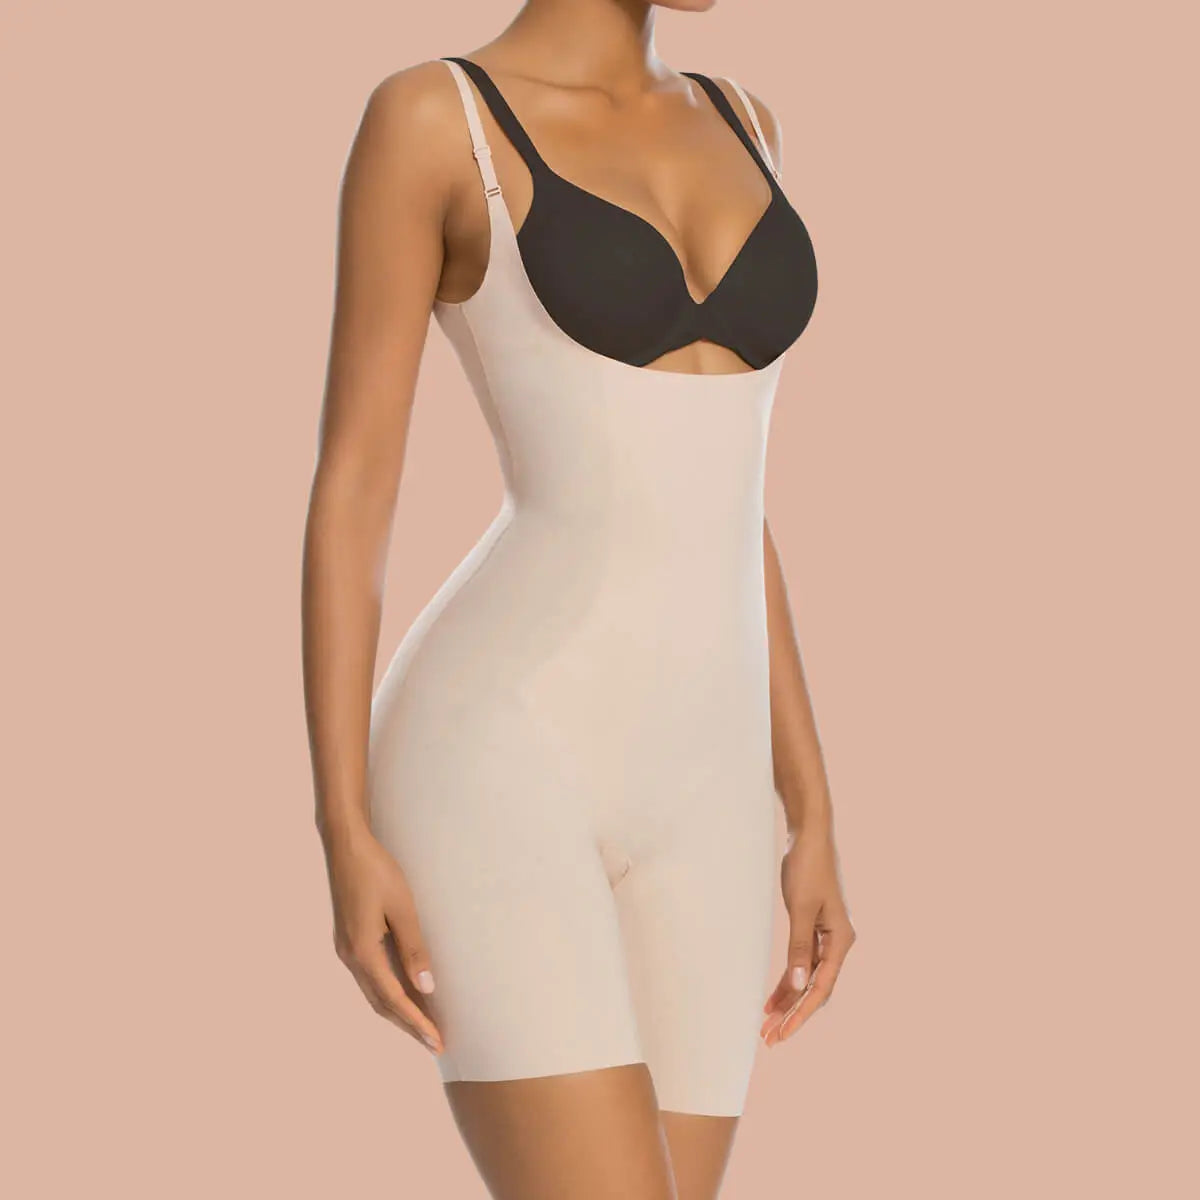 Open Bust Mid-Thigh Control Body Shaper with Removable Pads by TrueSha –